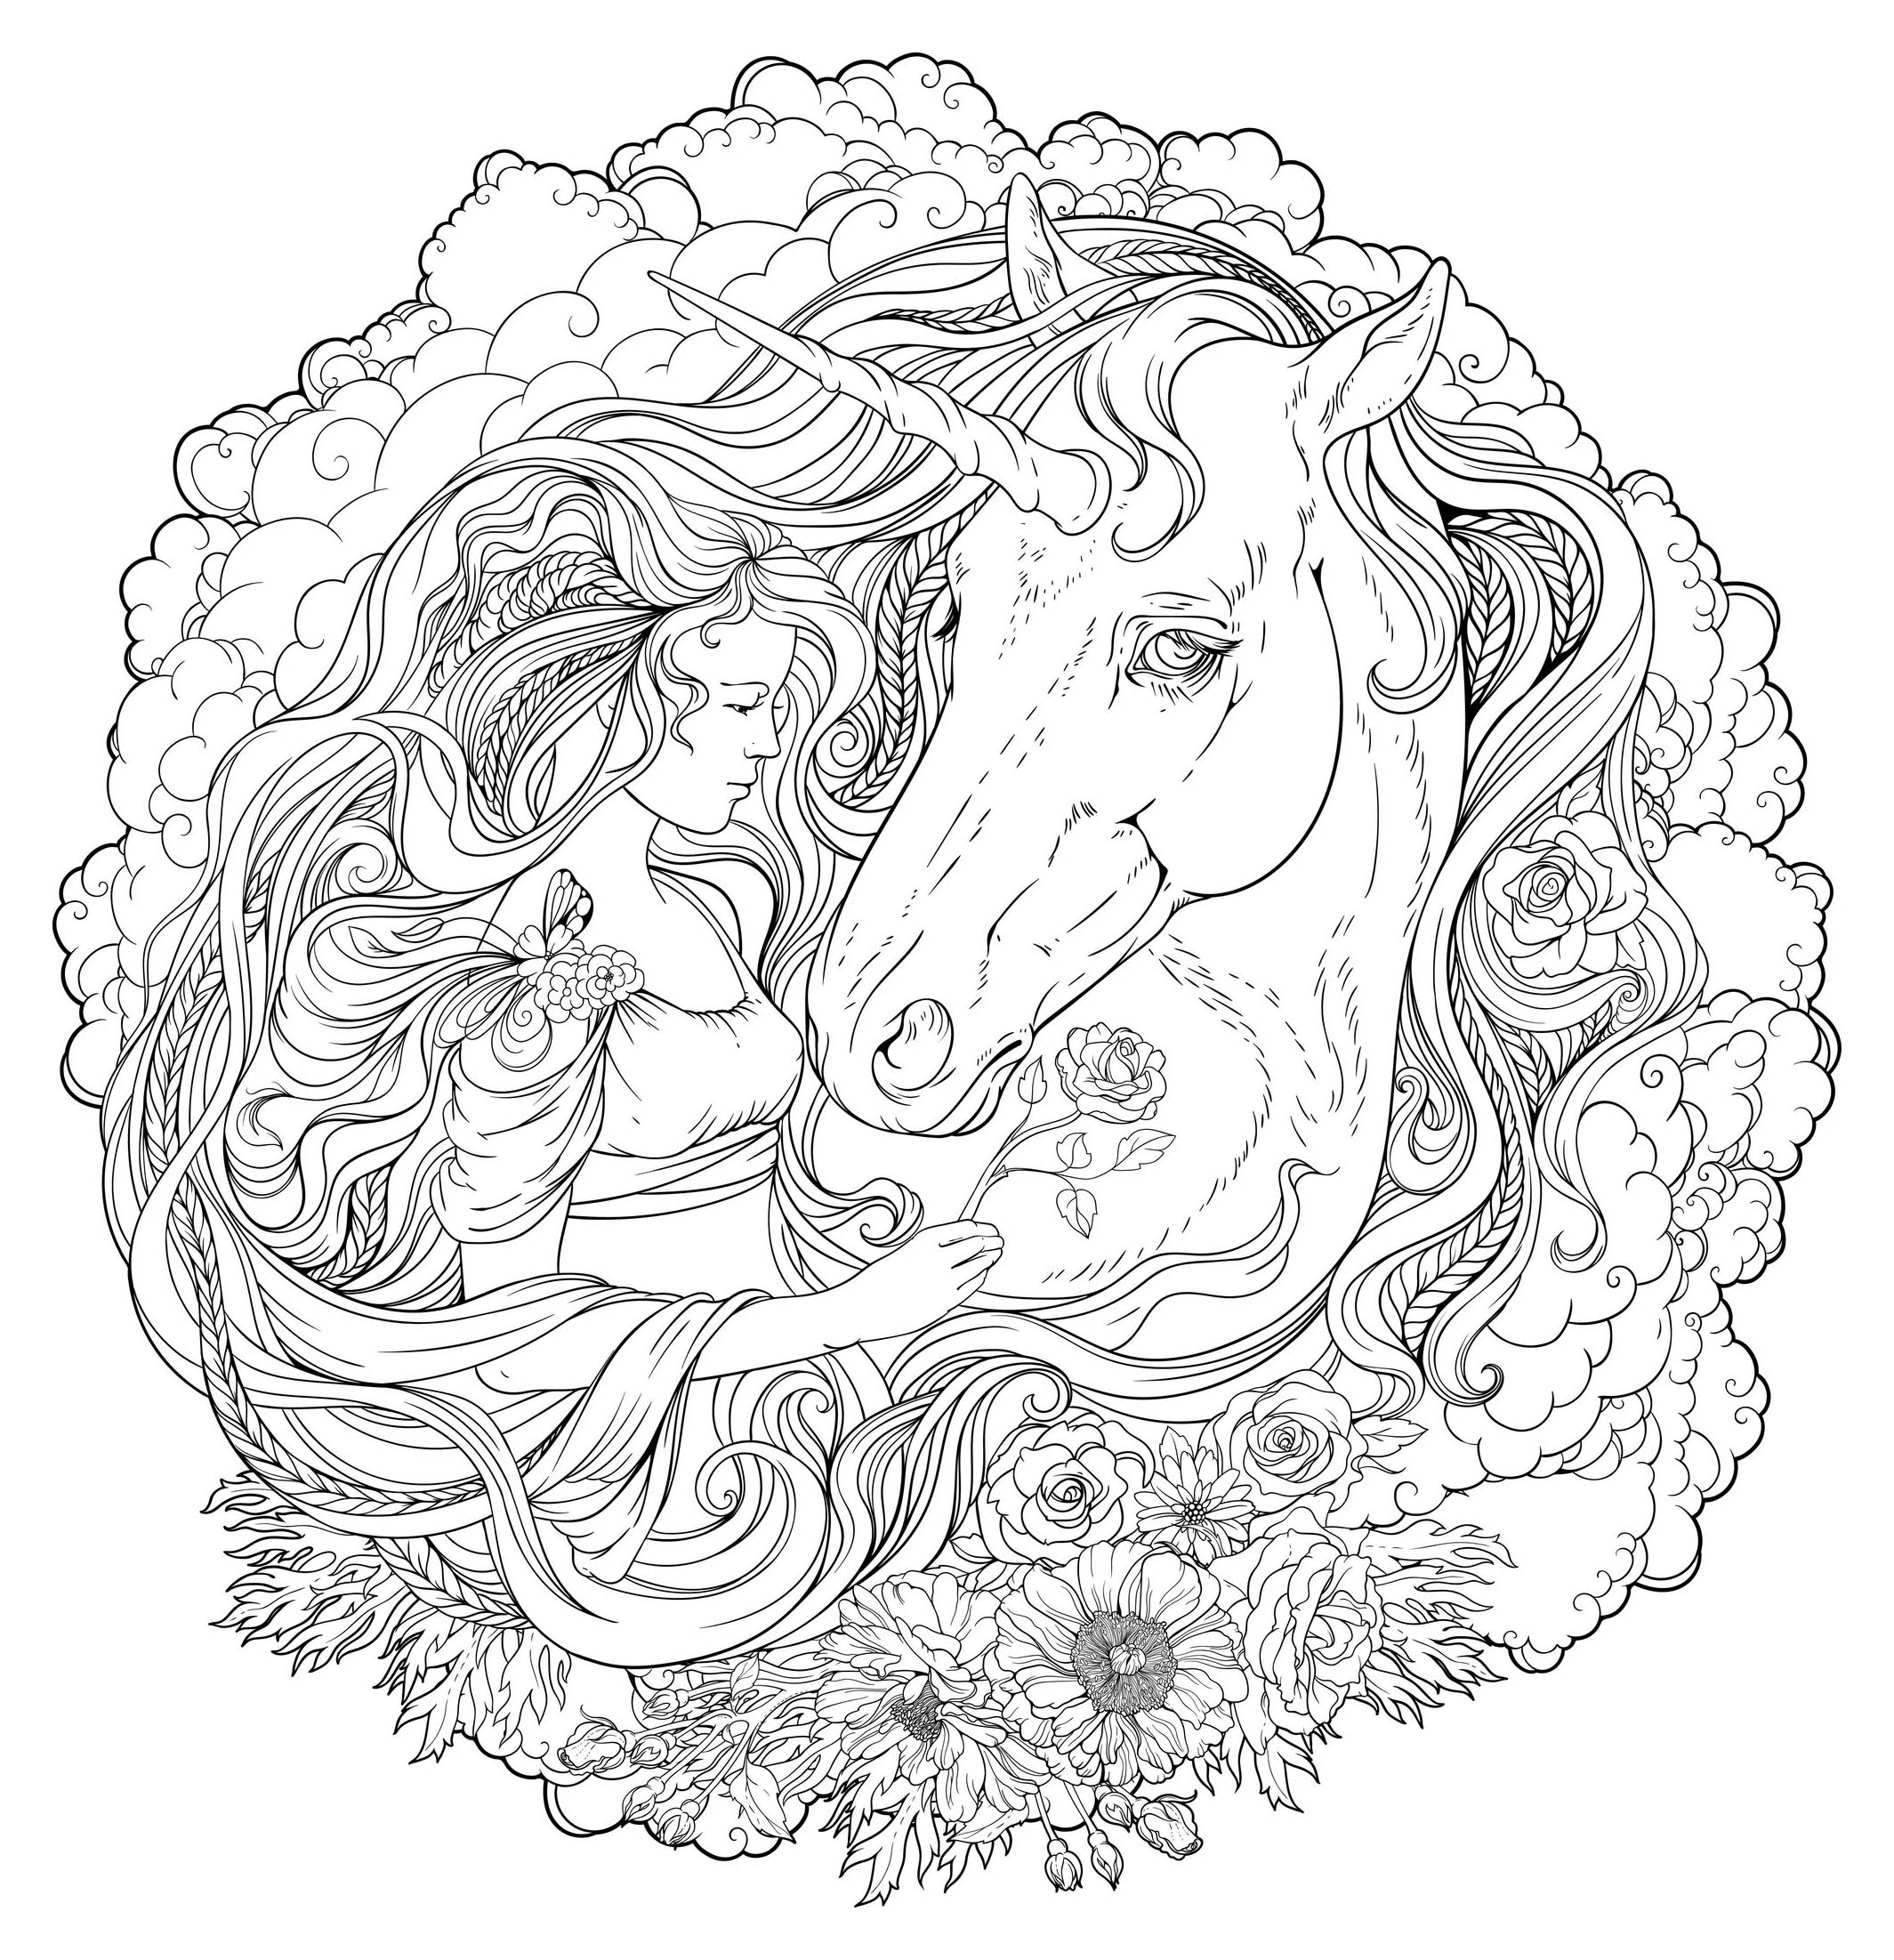 Girl & unicorn in clouds. If you are ready to color during a long time, get ready to color this incredible Mandala coloring page ... You can use the colors you prefer. The mandala's purpose is to help transform ordinary minds into enlightened ones and to assist with healing, Source : 123rf   Artist : Nadiia Zhebrakovska